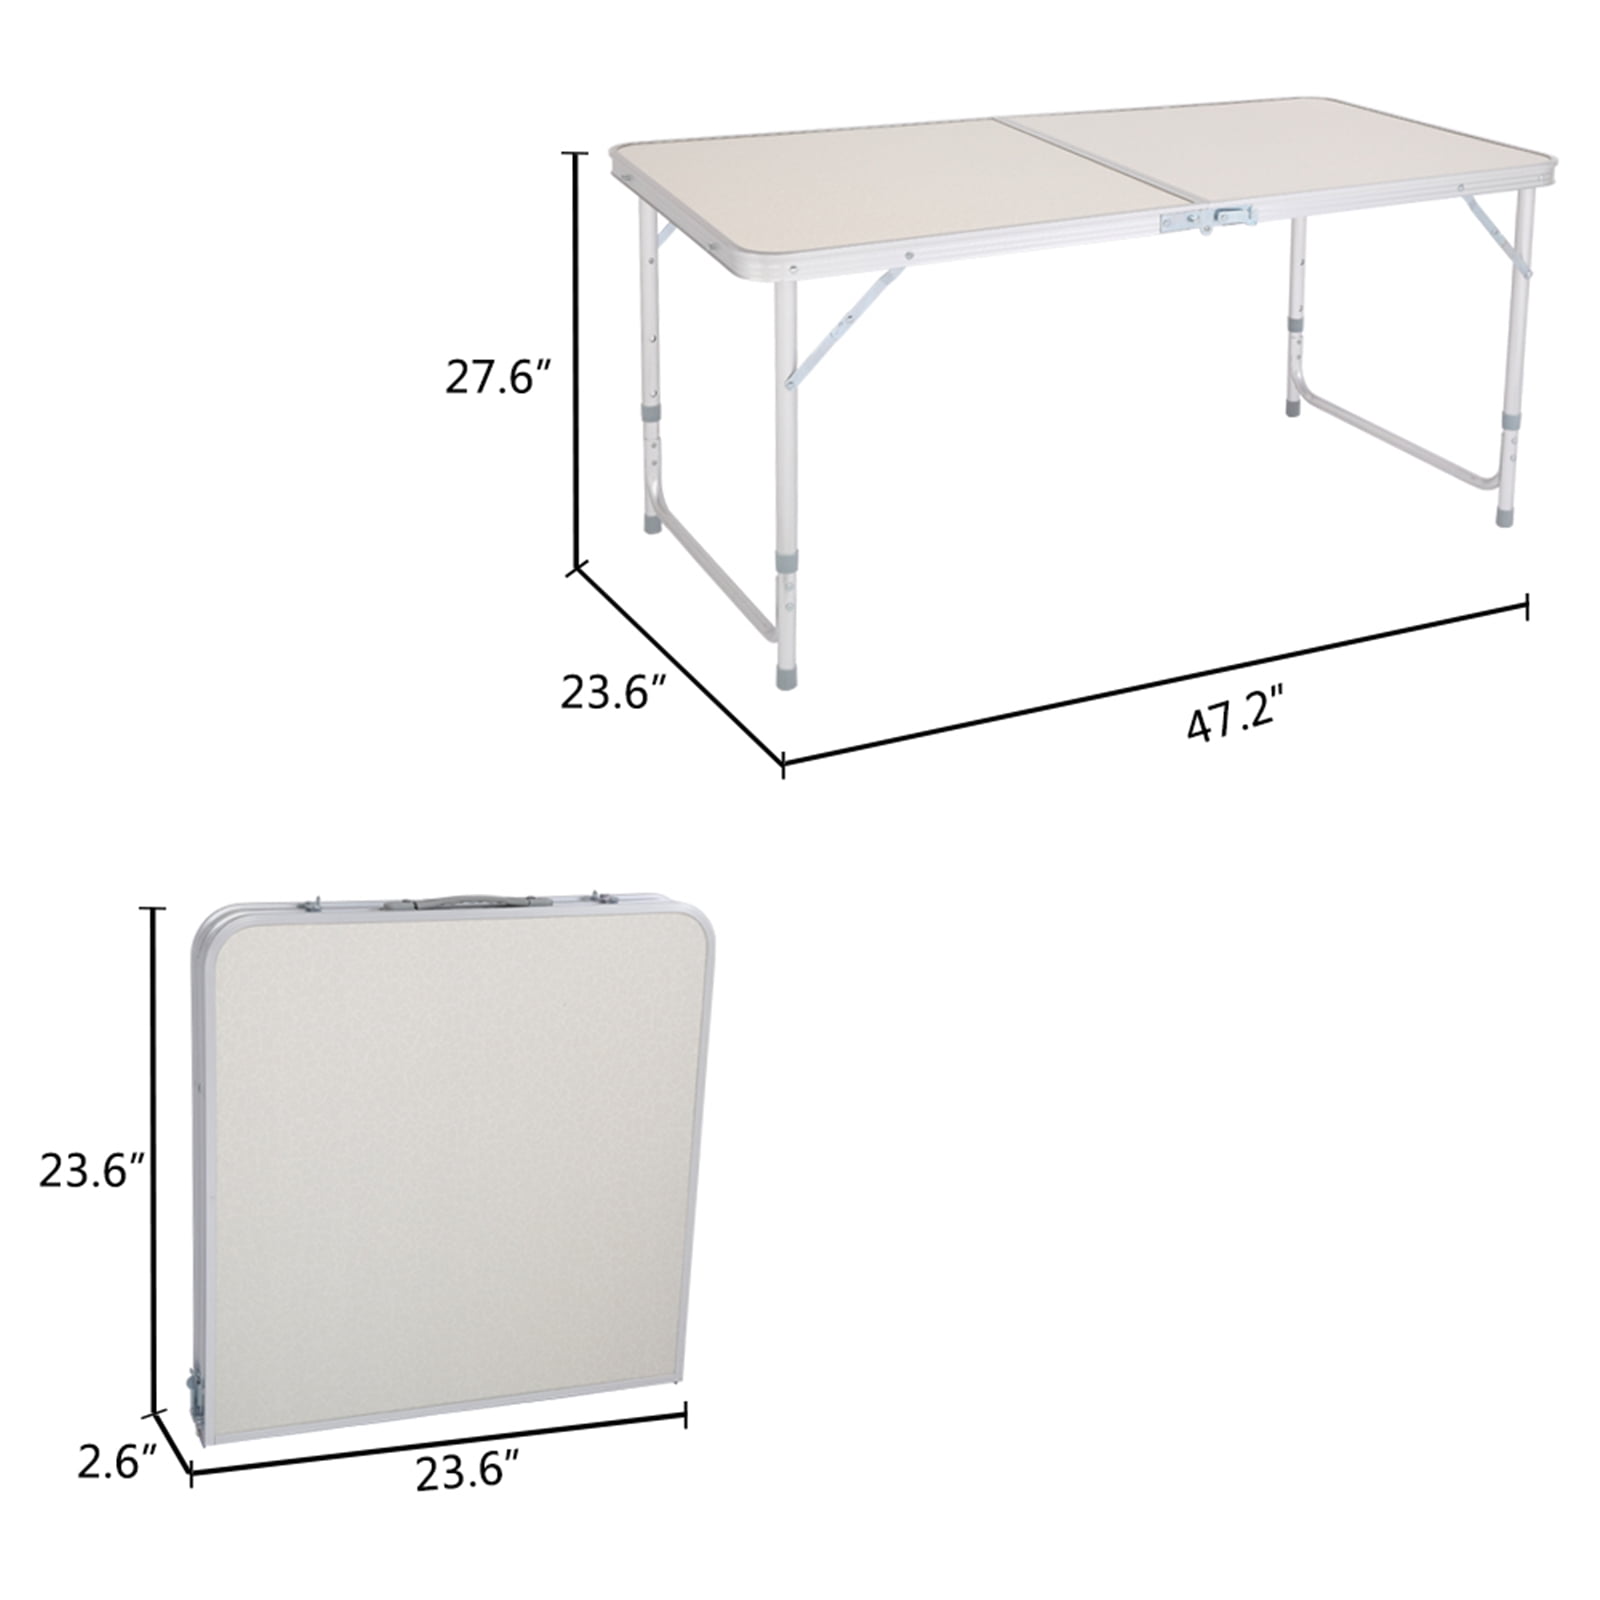 Details about   120 x 60 x 70 4Ft Folding Portable Multipurpose Table White BBQ Outdoor Picnic 